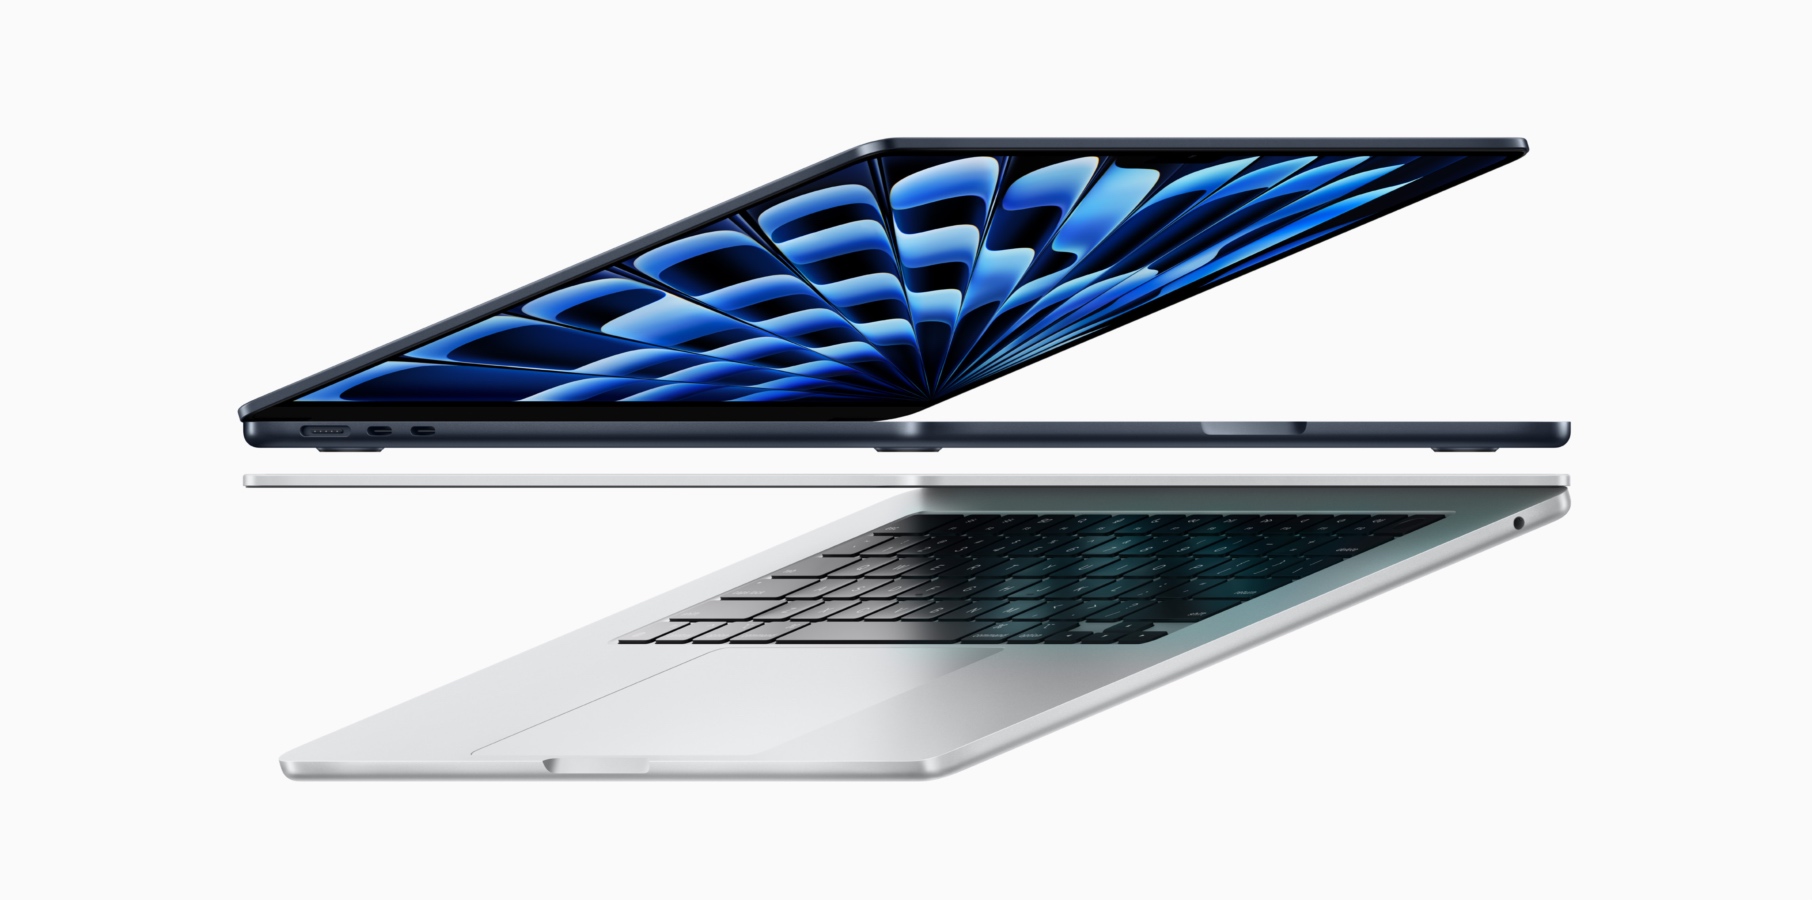 M3 MacBook Air announced: Top features, release date, more